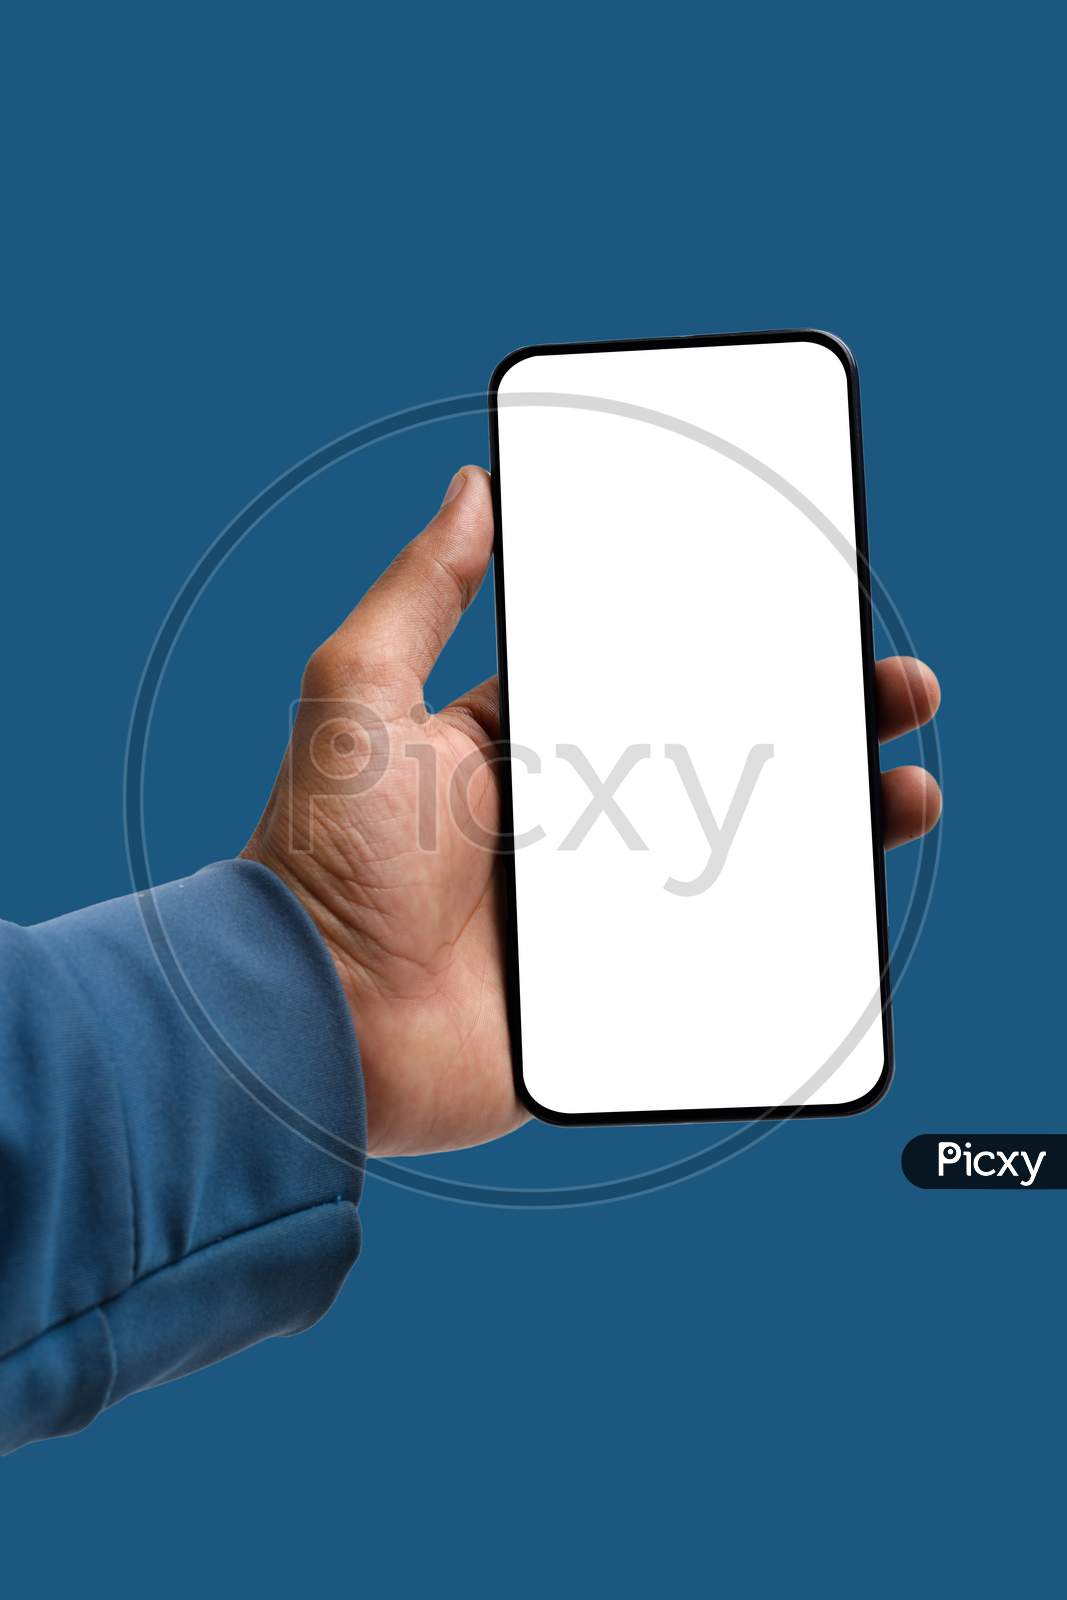 Holding Smartphone In Hand On Blue Background